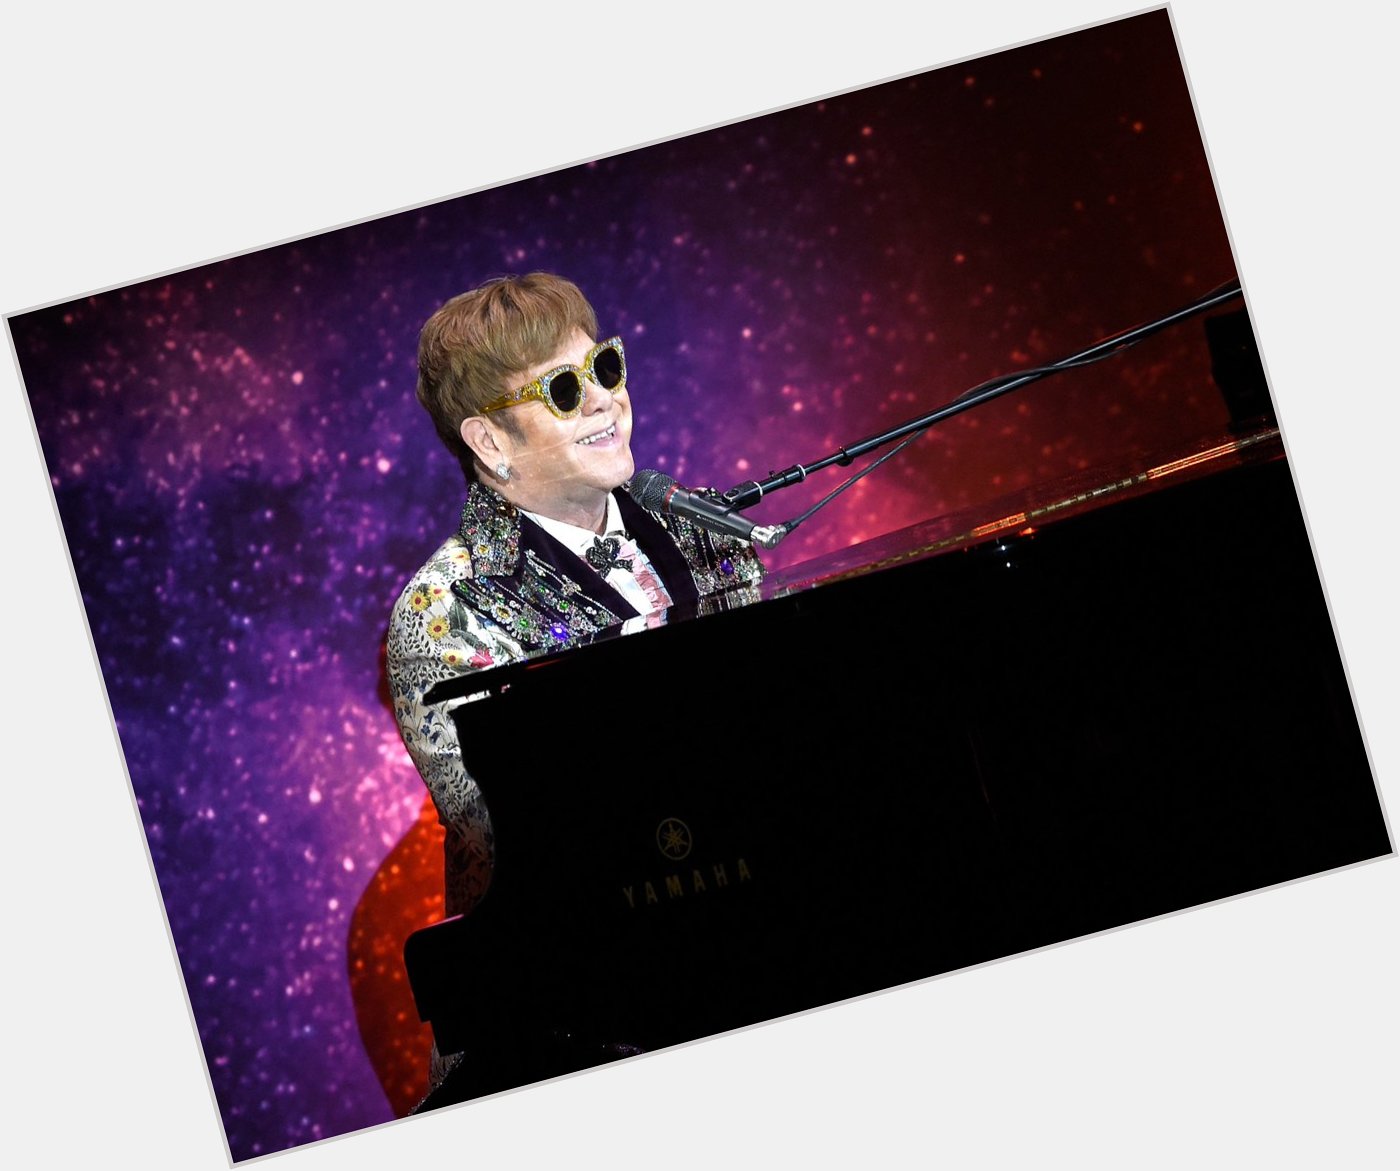  Happy birthday to the one and only Rocket Man, Sir Elton John! 